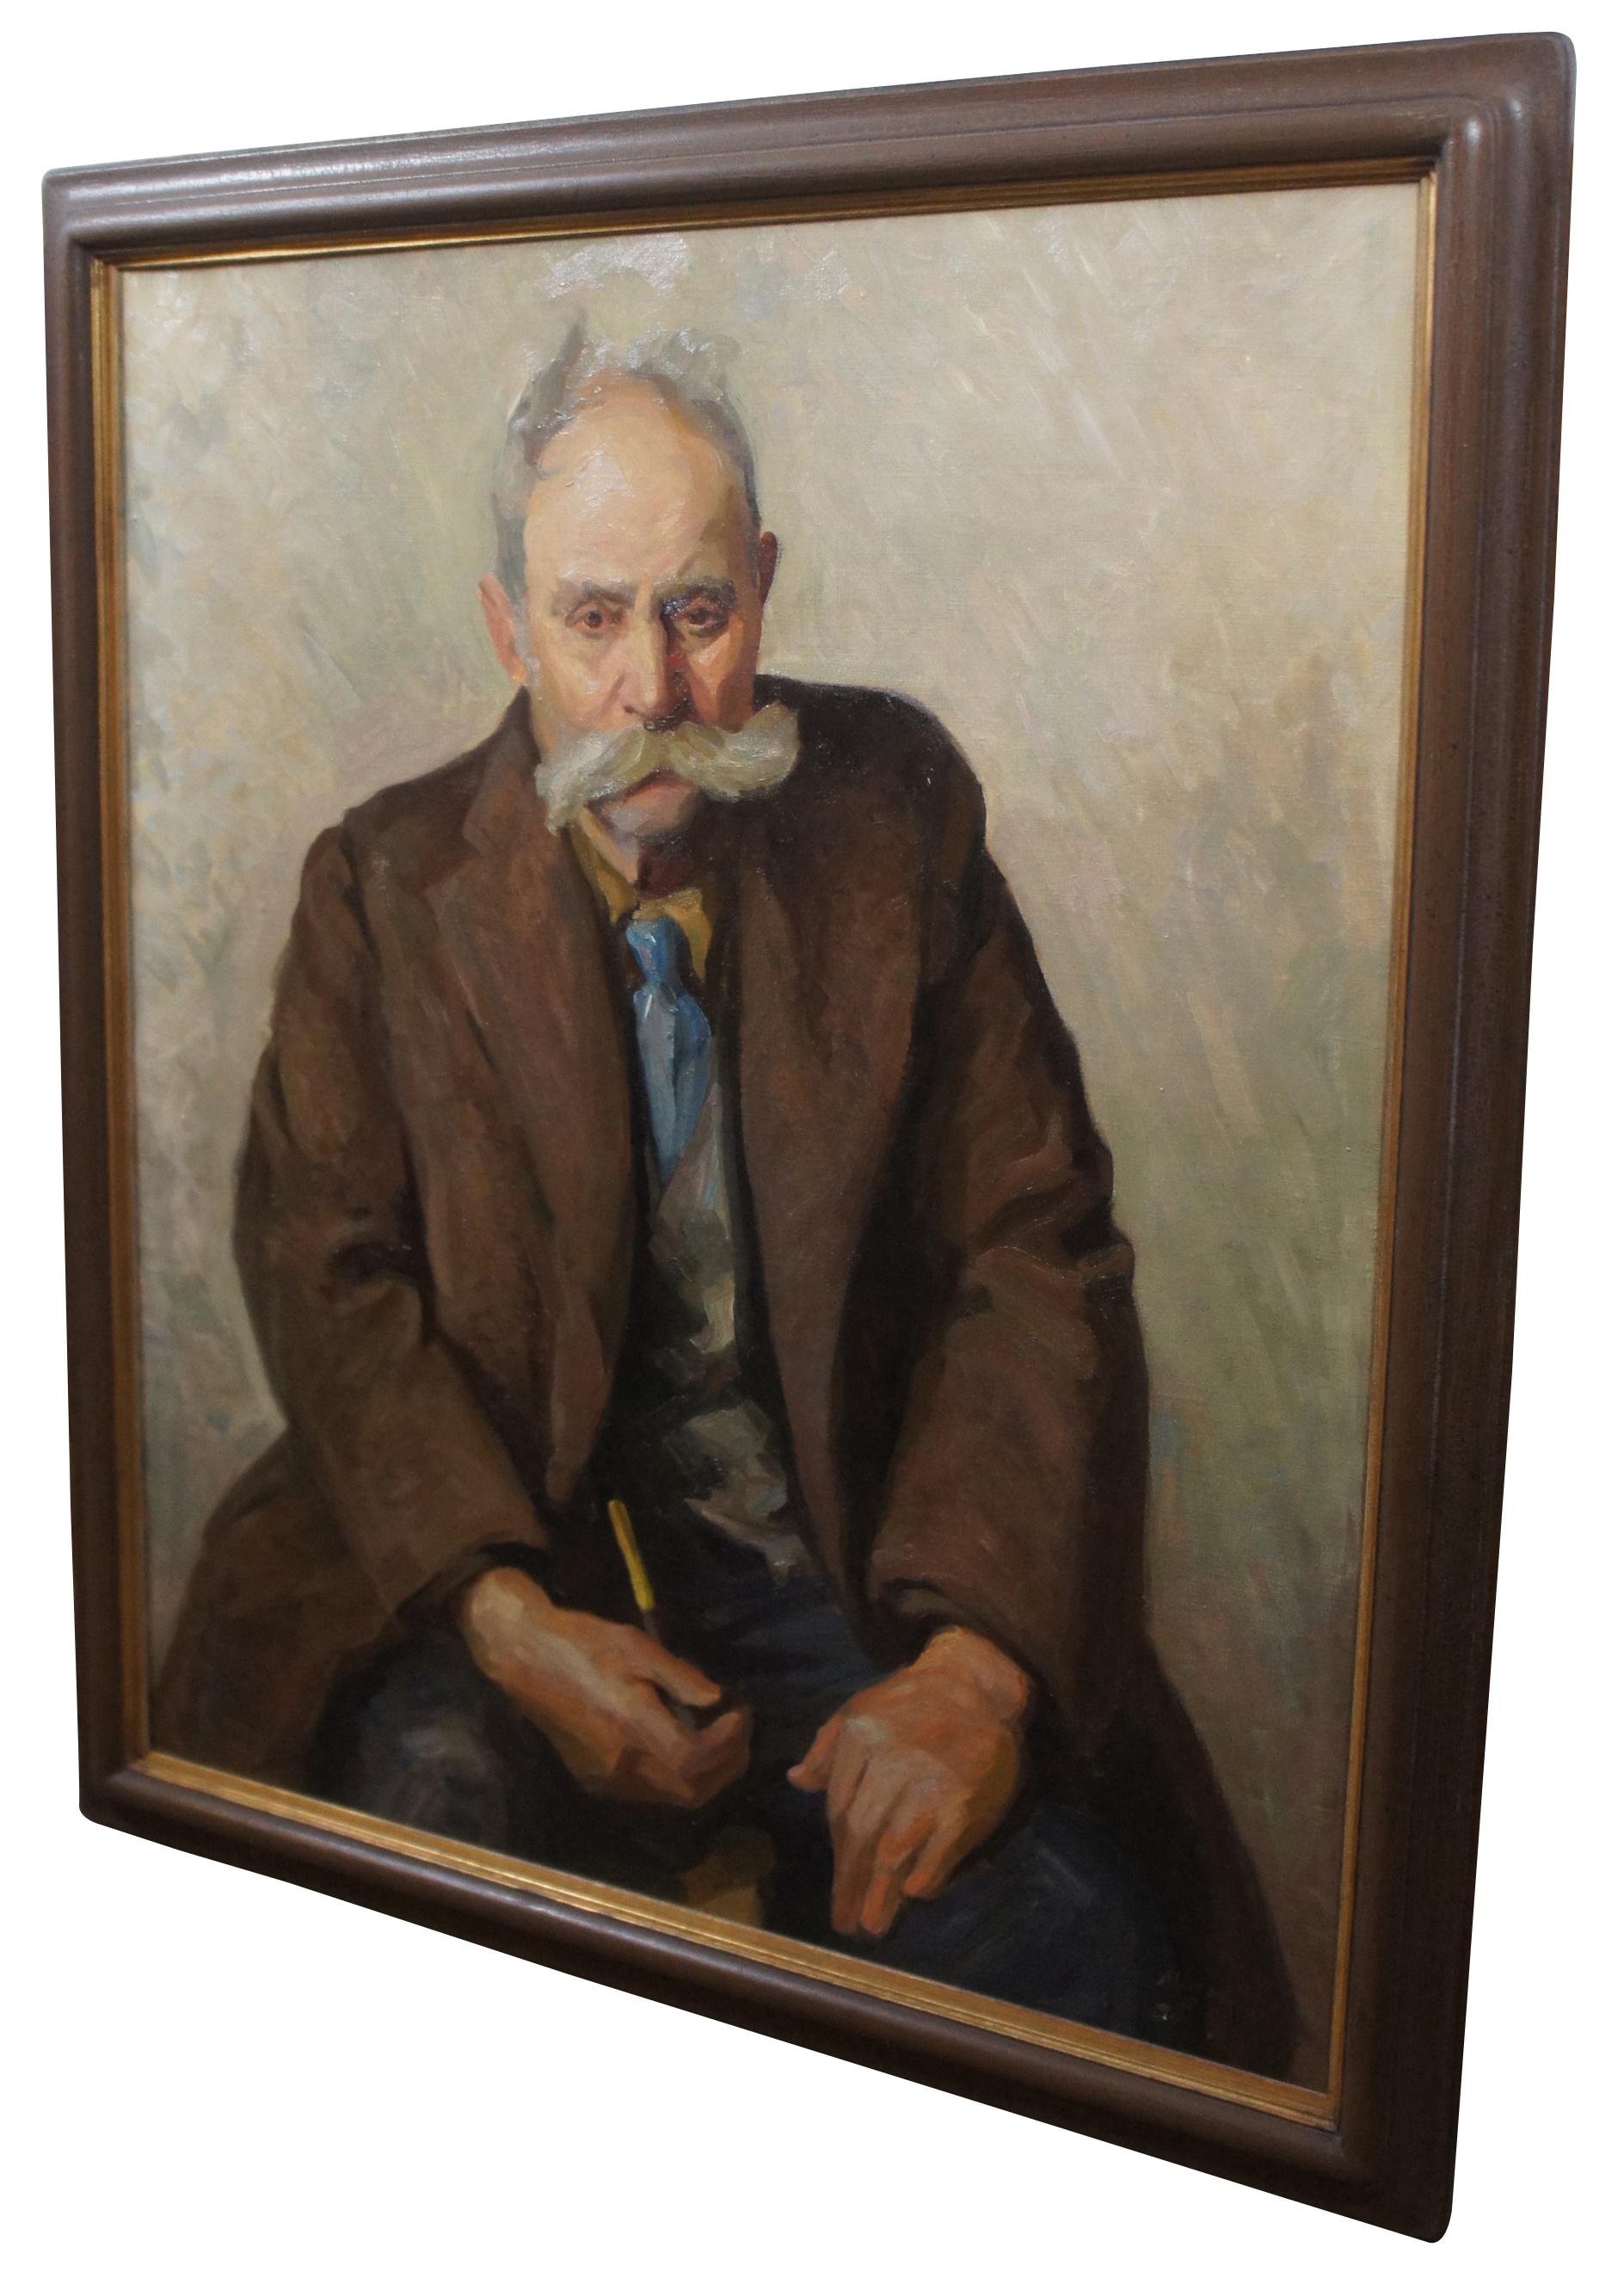 20th century signed oil on canvas painting by Milton D. Birch featuring a seated man with a large mustache holding a sherlock. Milton is an active American painter. 

Sans frame - 29.25” x 34.25”.